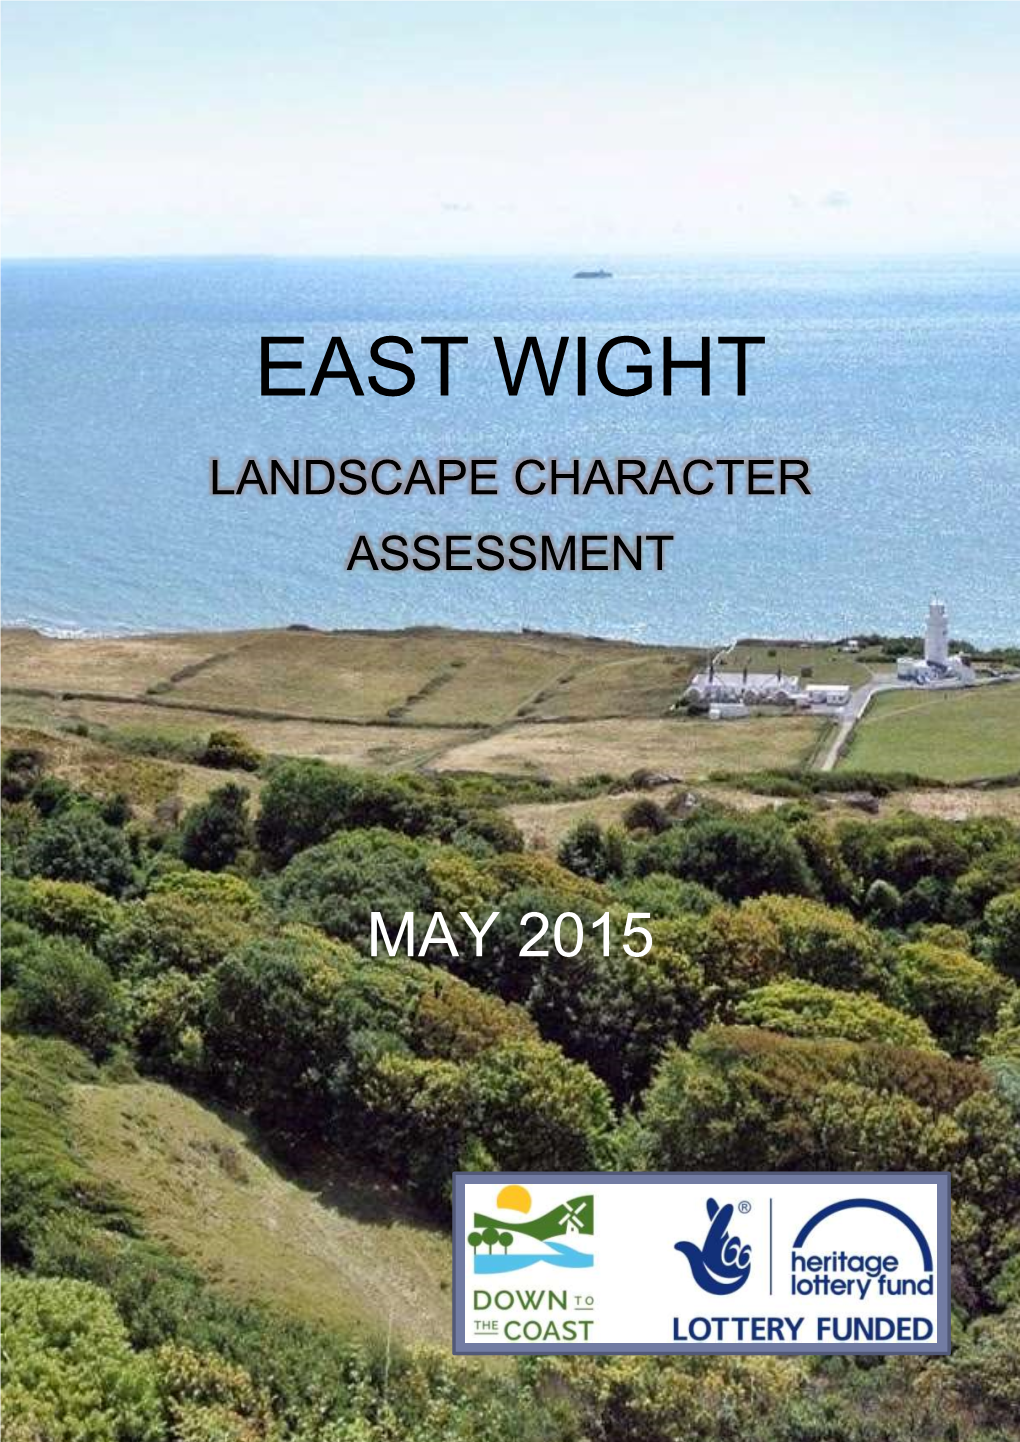 East Wight Landscape Character Assessment